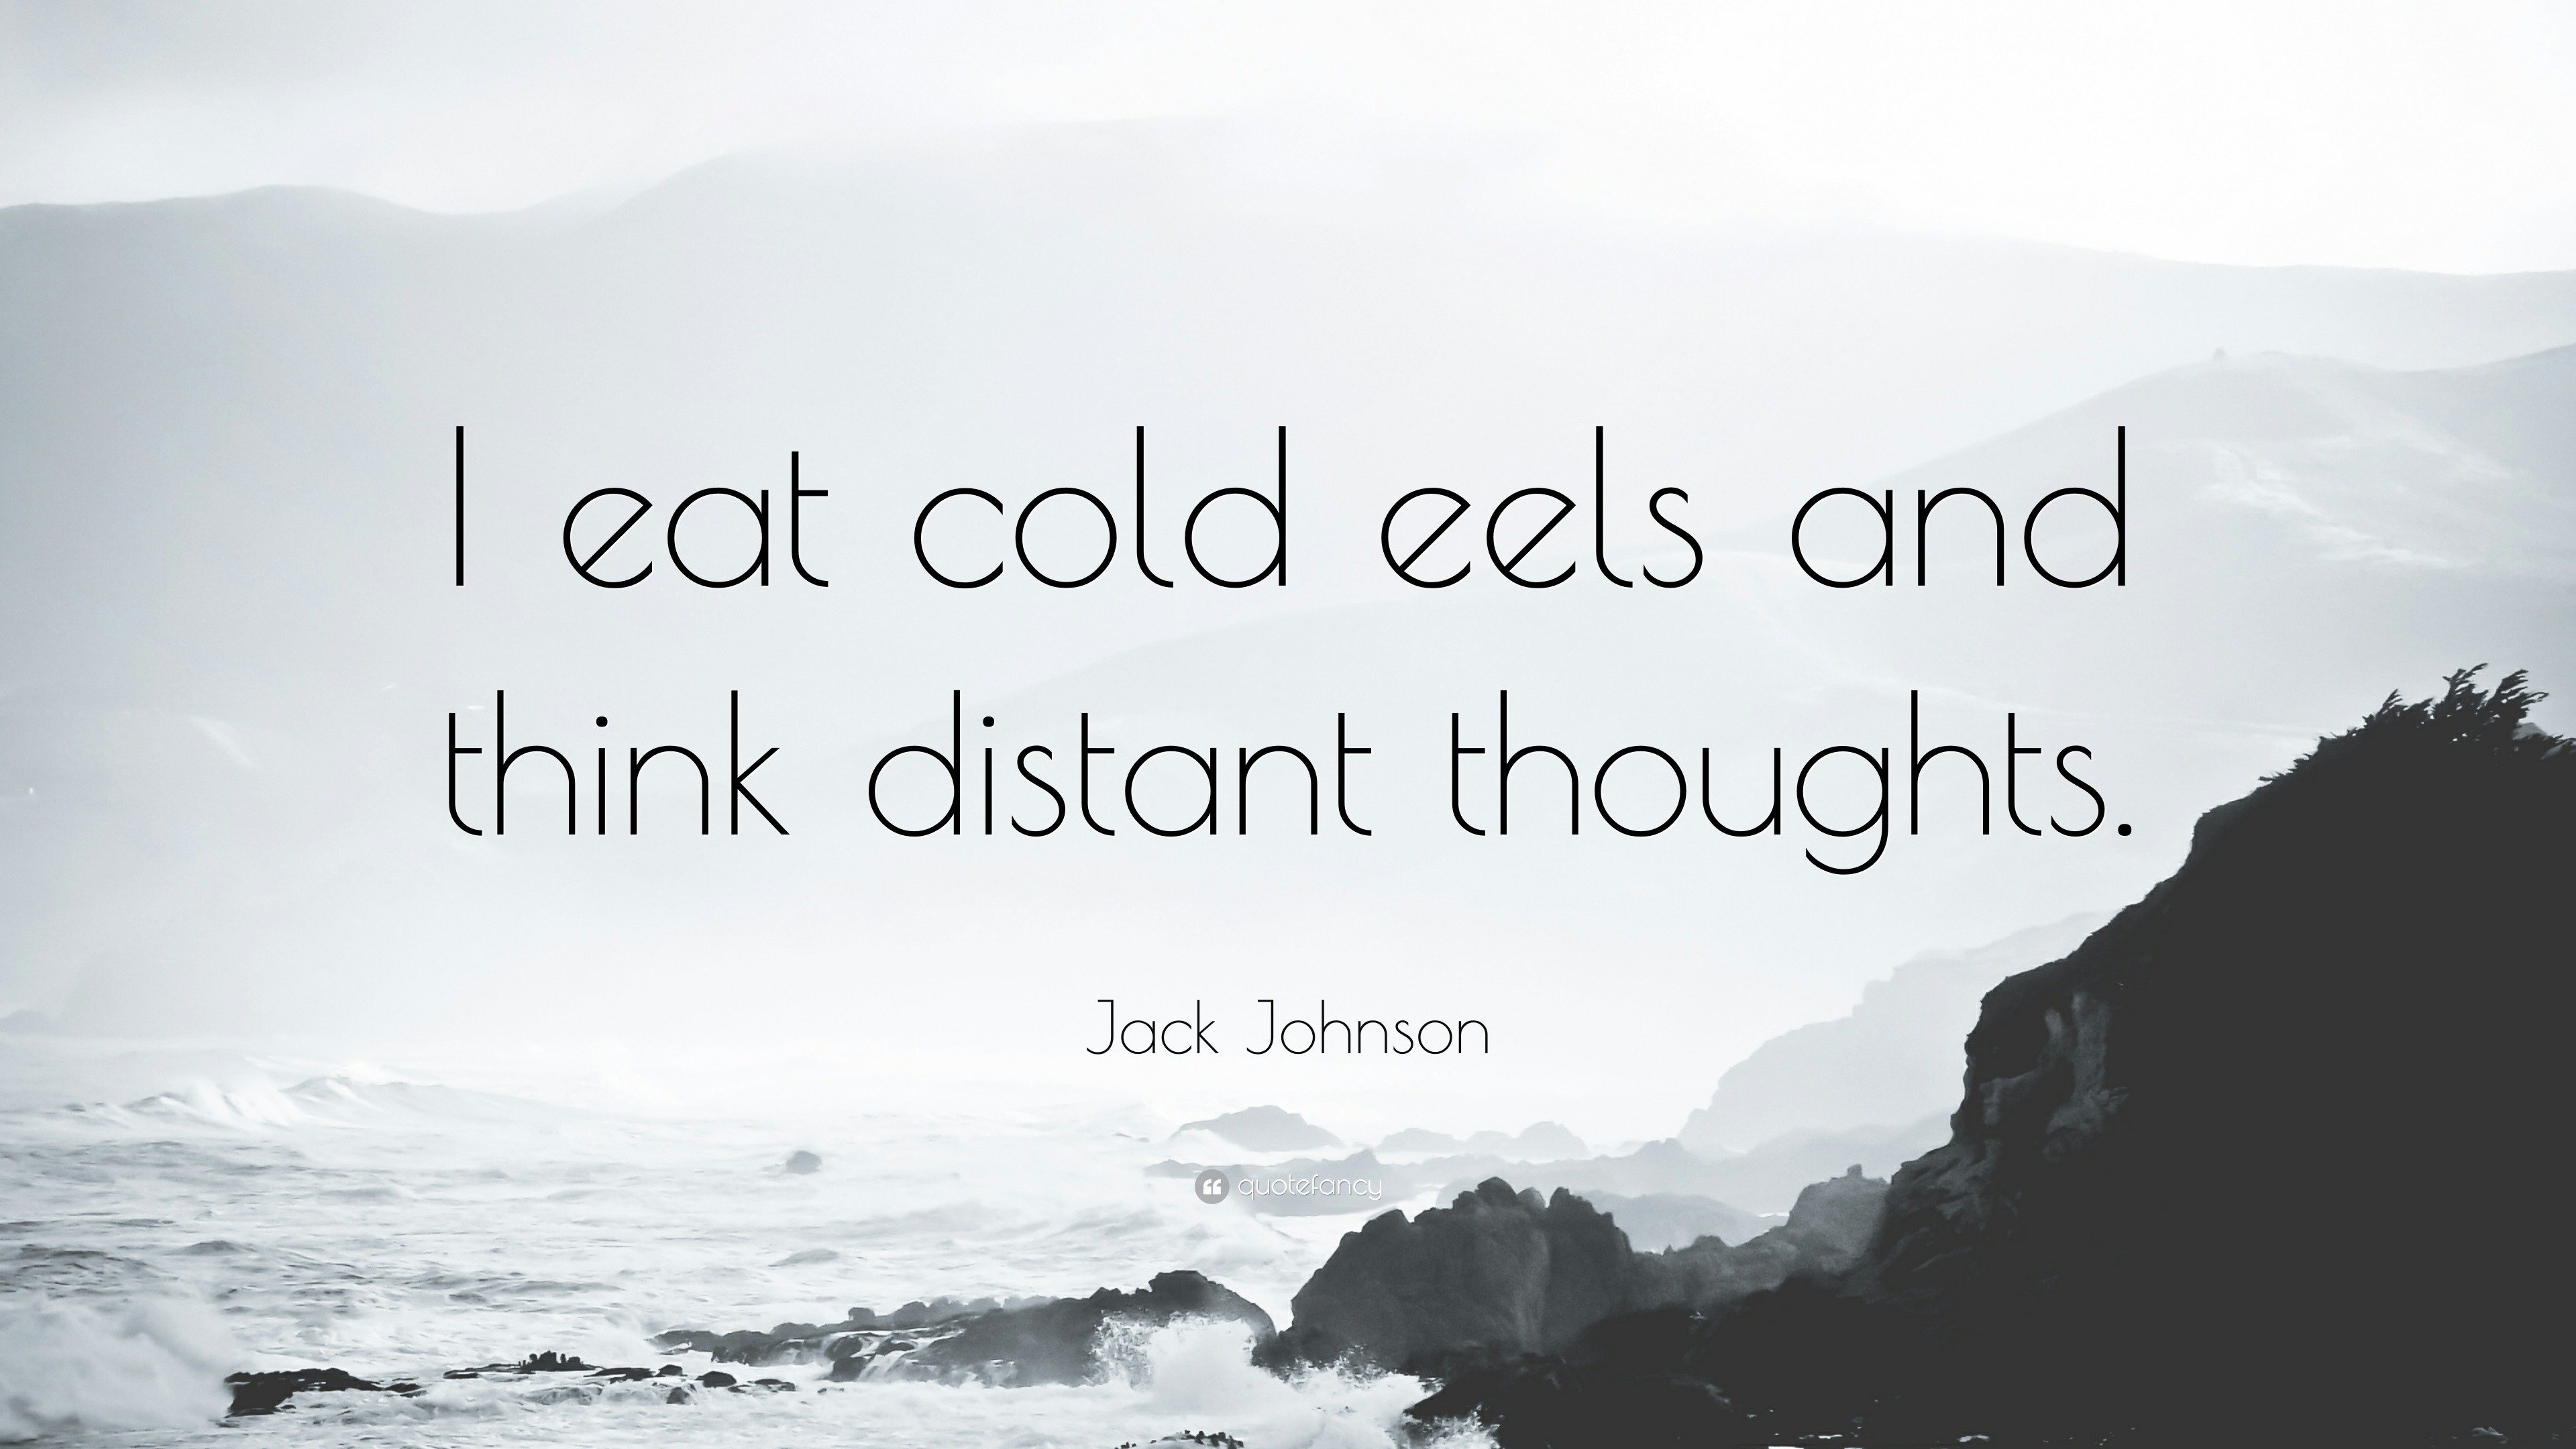 Jack Johnson Quote: “I eat cold eels and think distant ...